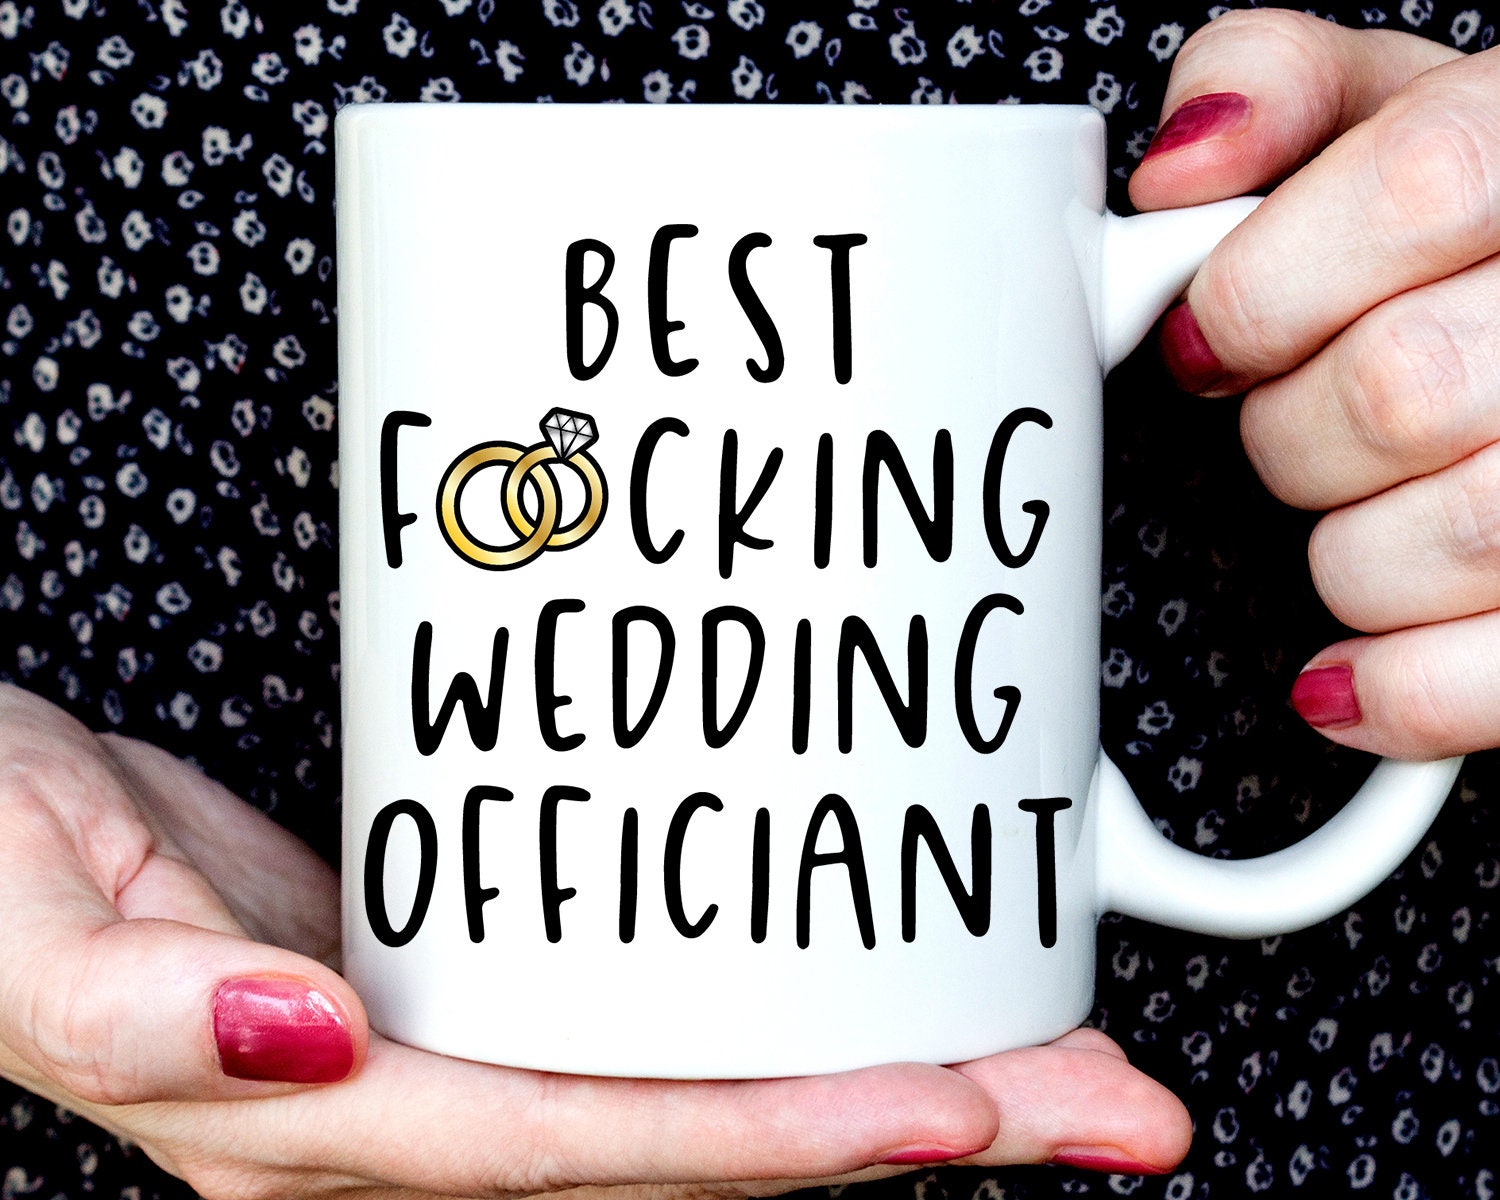 Wedding Planner Gift Bridal Party Gift for Wedding Planner MG0034 Best Fucking Wedding Planner Ever Best Planner Officiant Coffee Mug